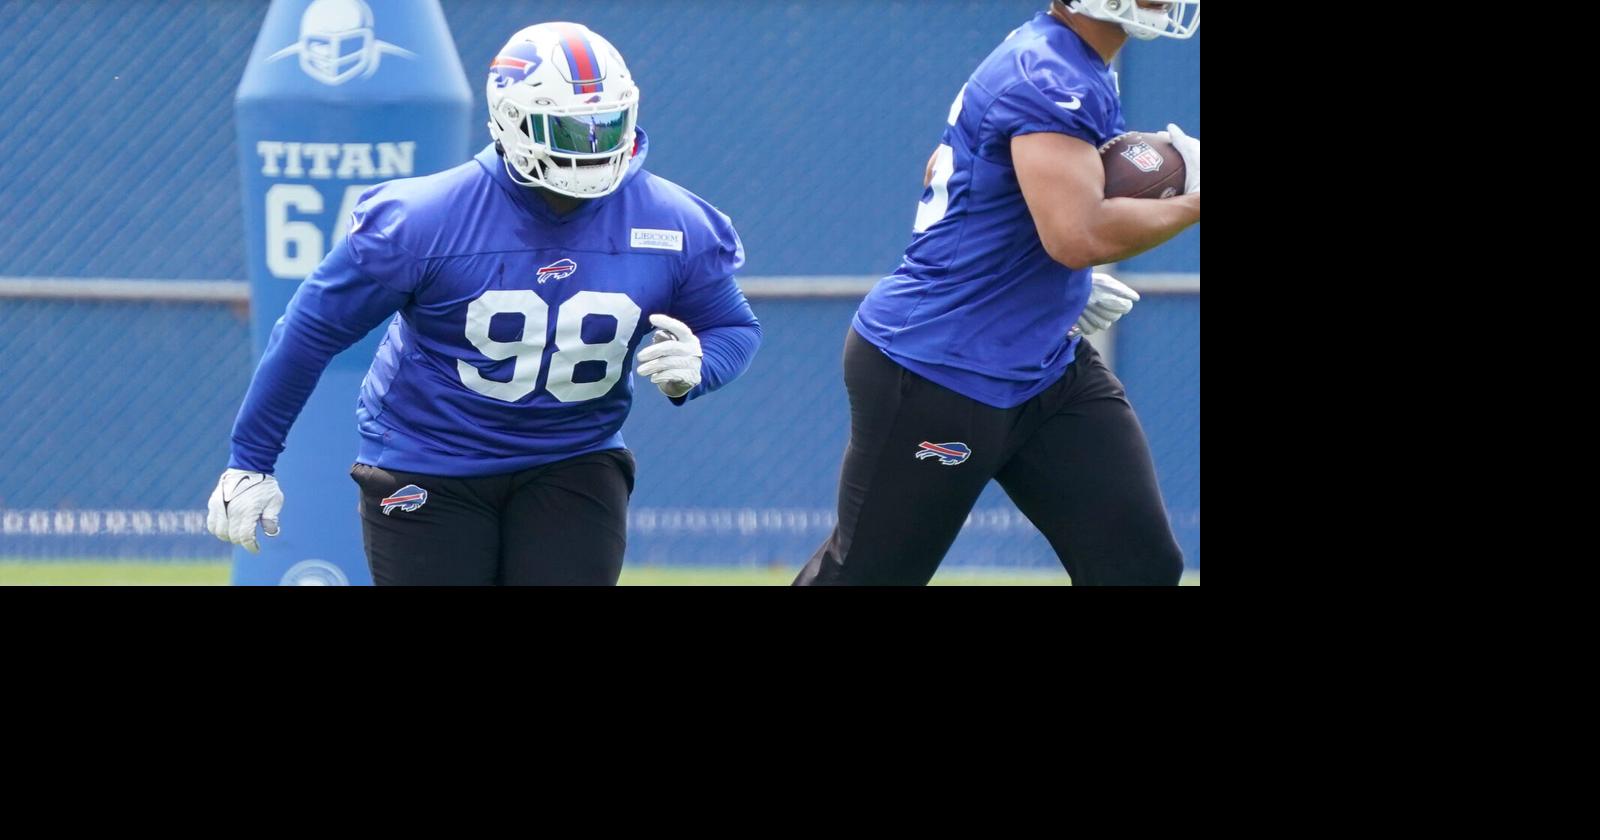 Defensive tackle Poona Ford feeling right at home with Bills